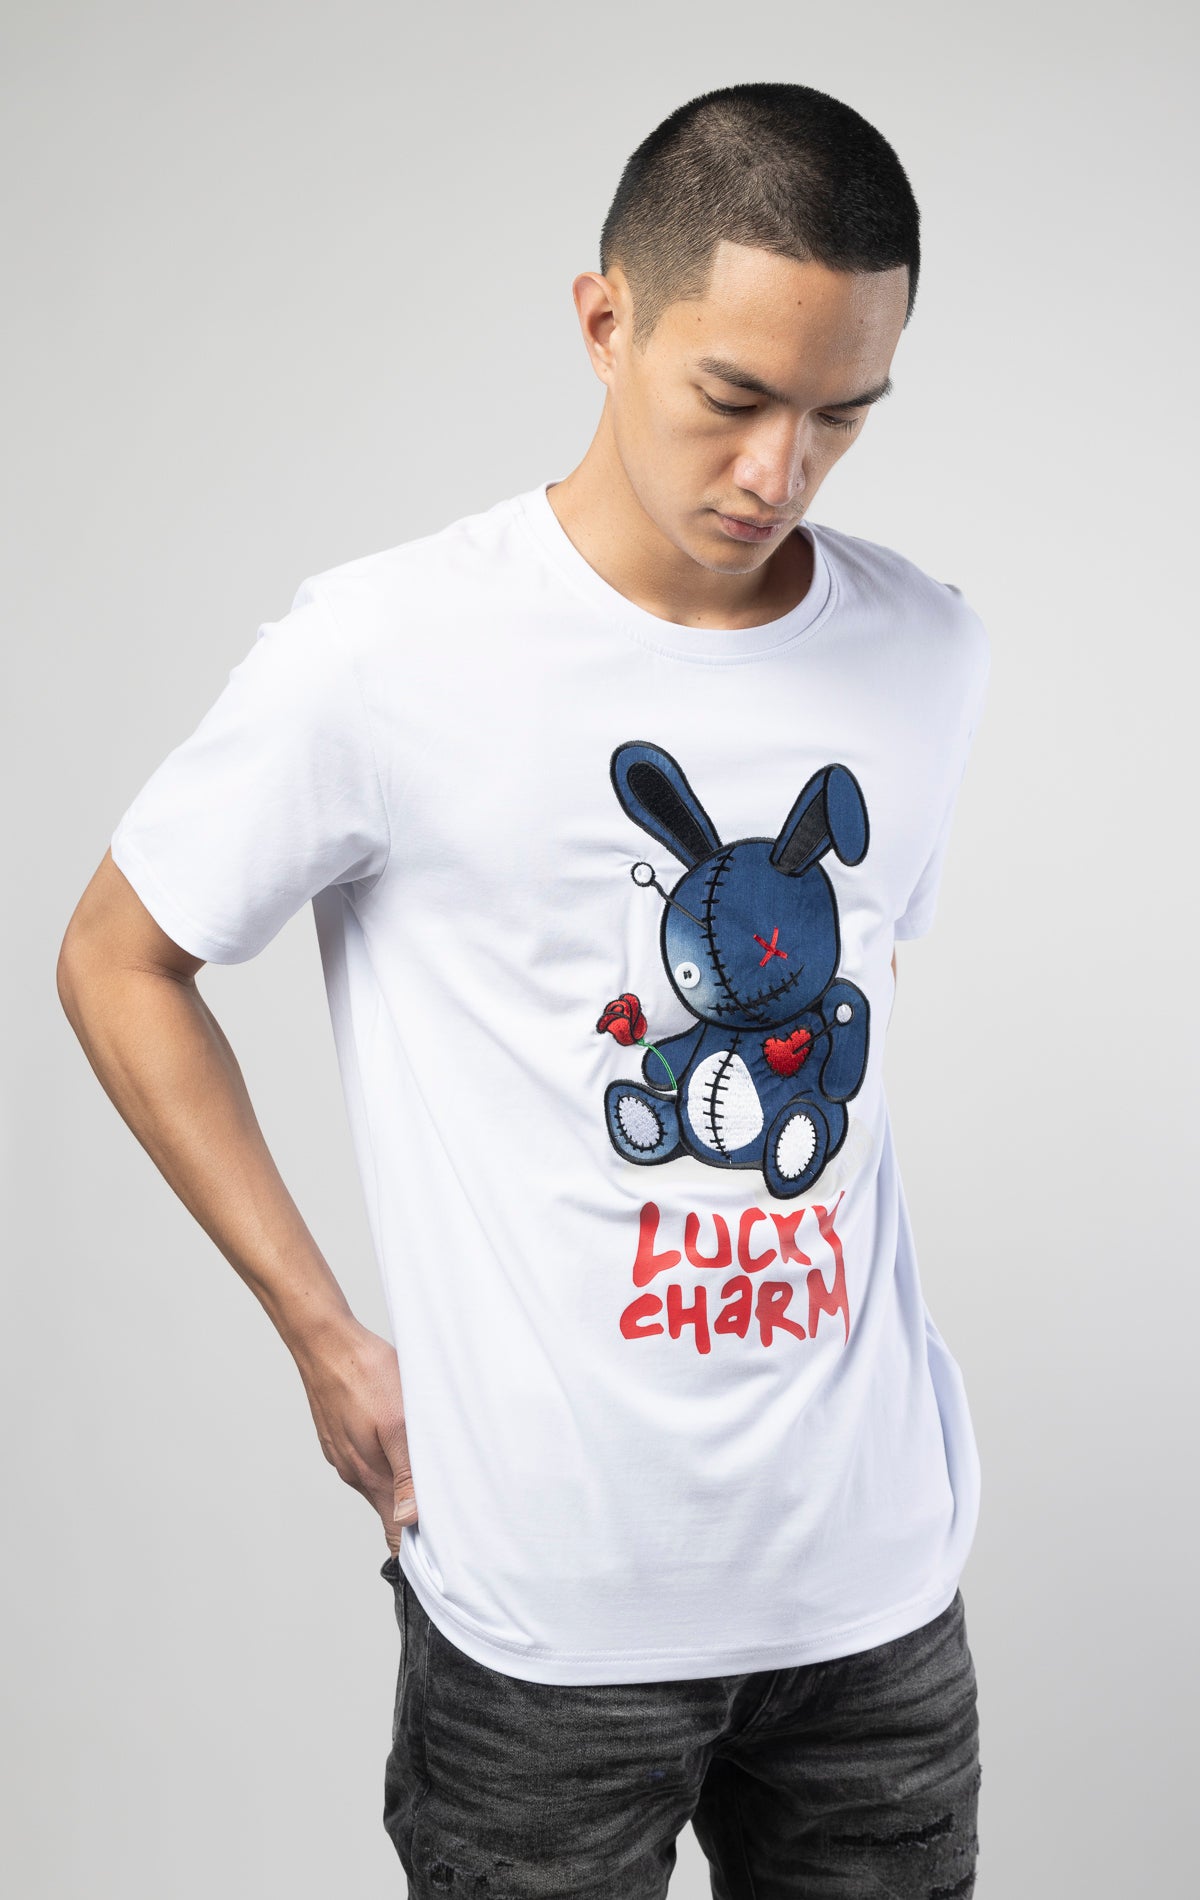 Update your wardrobe with this trendy short sleeves crewneck featuring a lucky denim bunny graphic on the front.